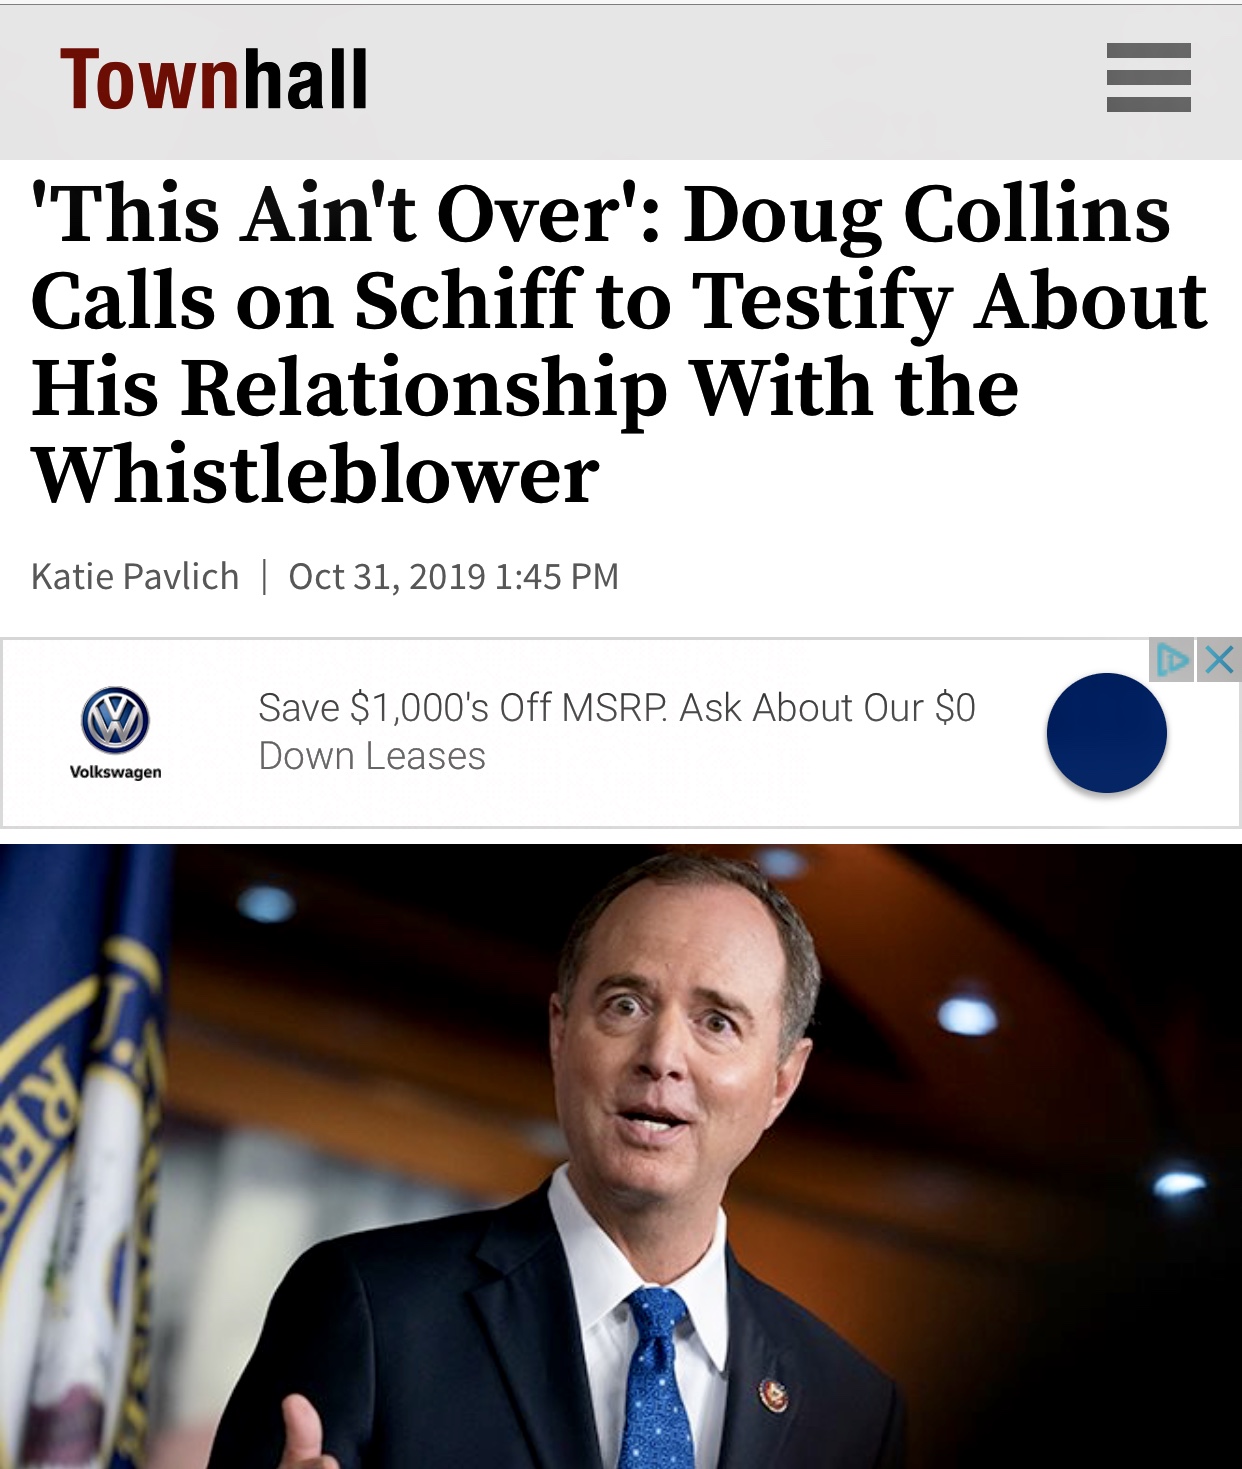 Doug Collins Calls on Schiff to Testify About His Relationship With Whistleblower